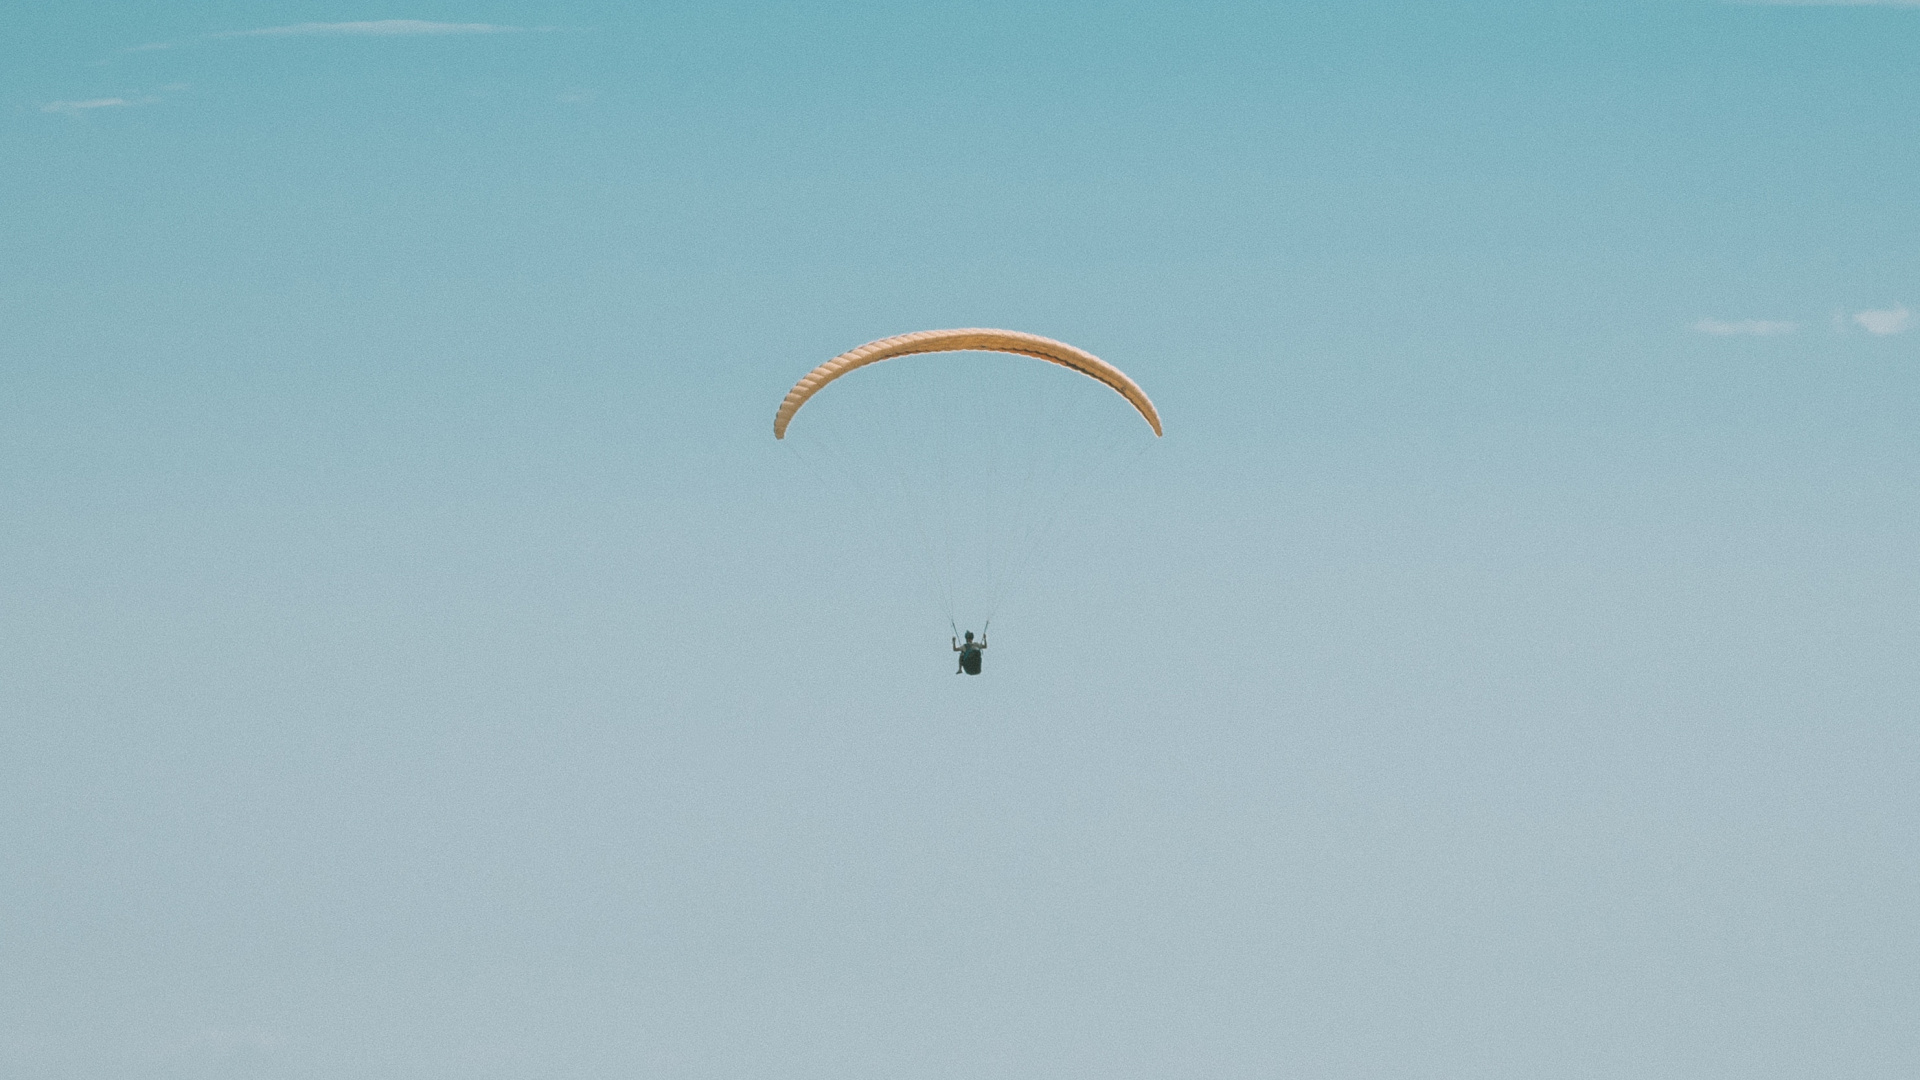 Person in Parachute Under Blue Sky During Daytime. Wallpaper in 1920x1080 Resolution